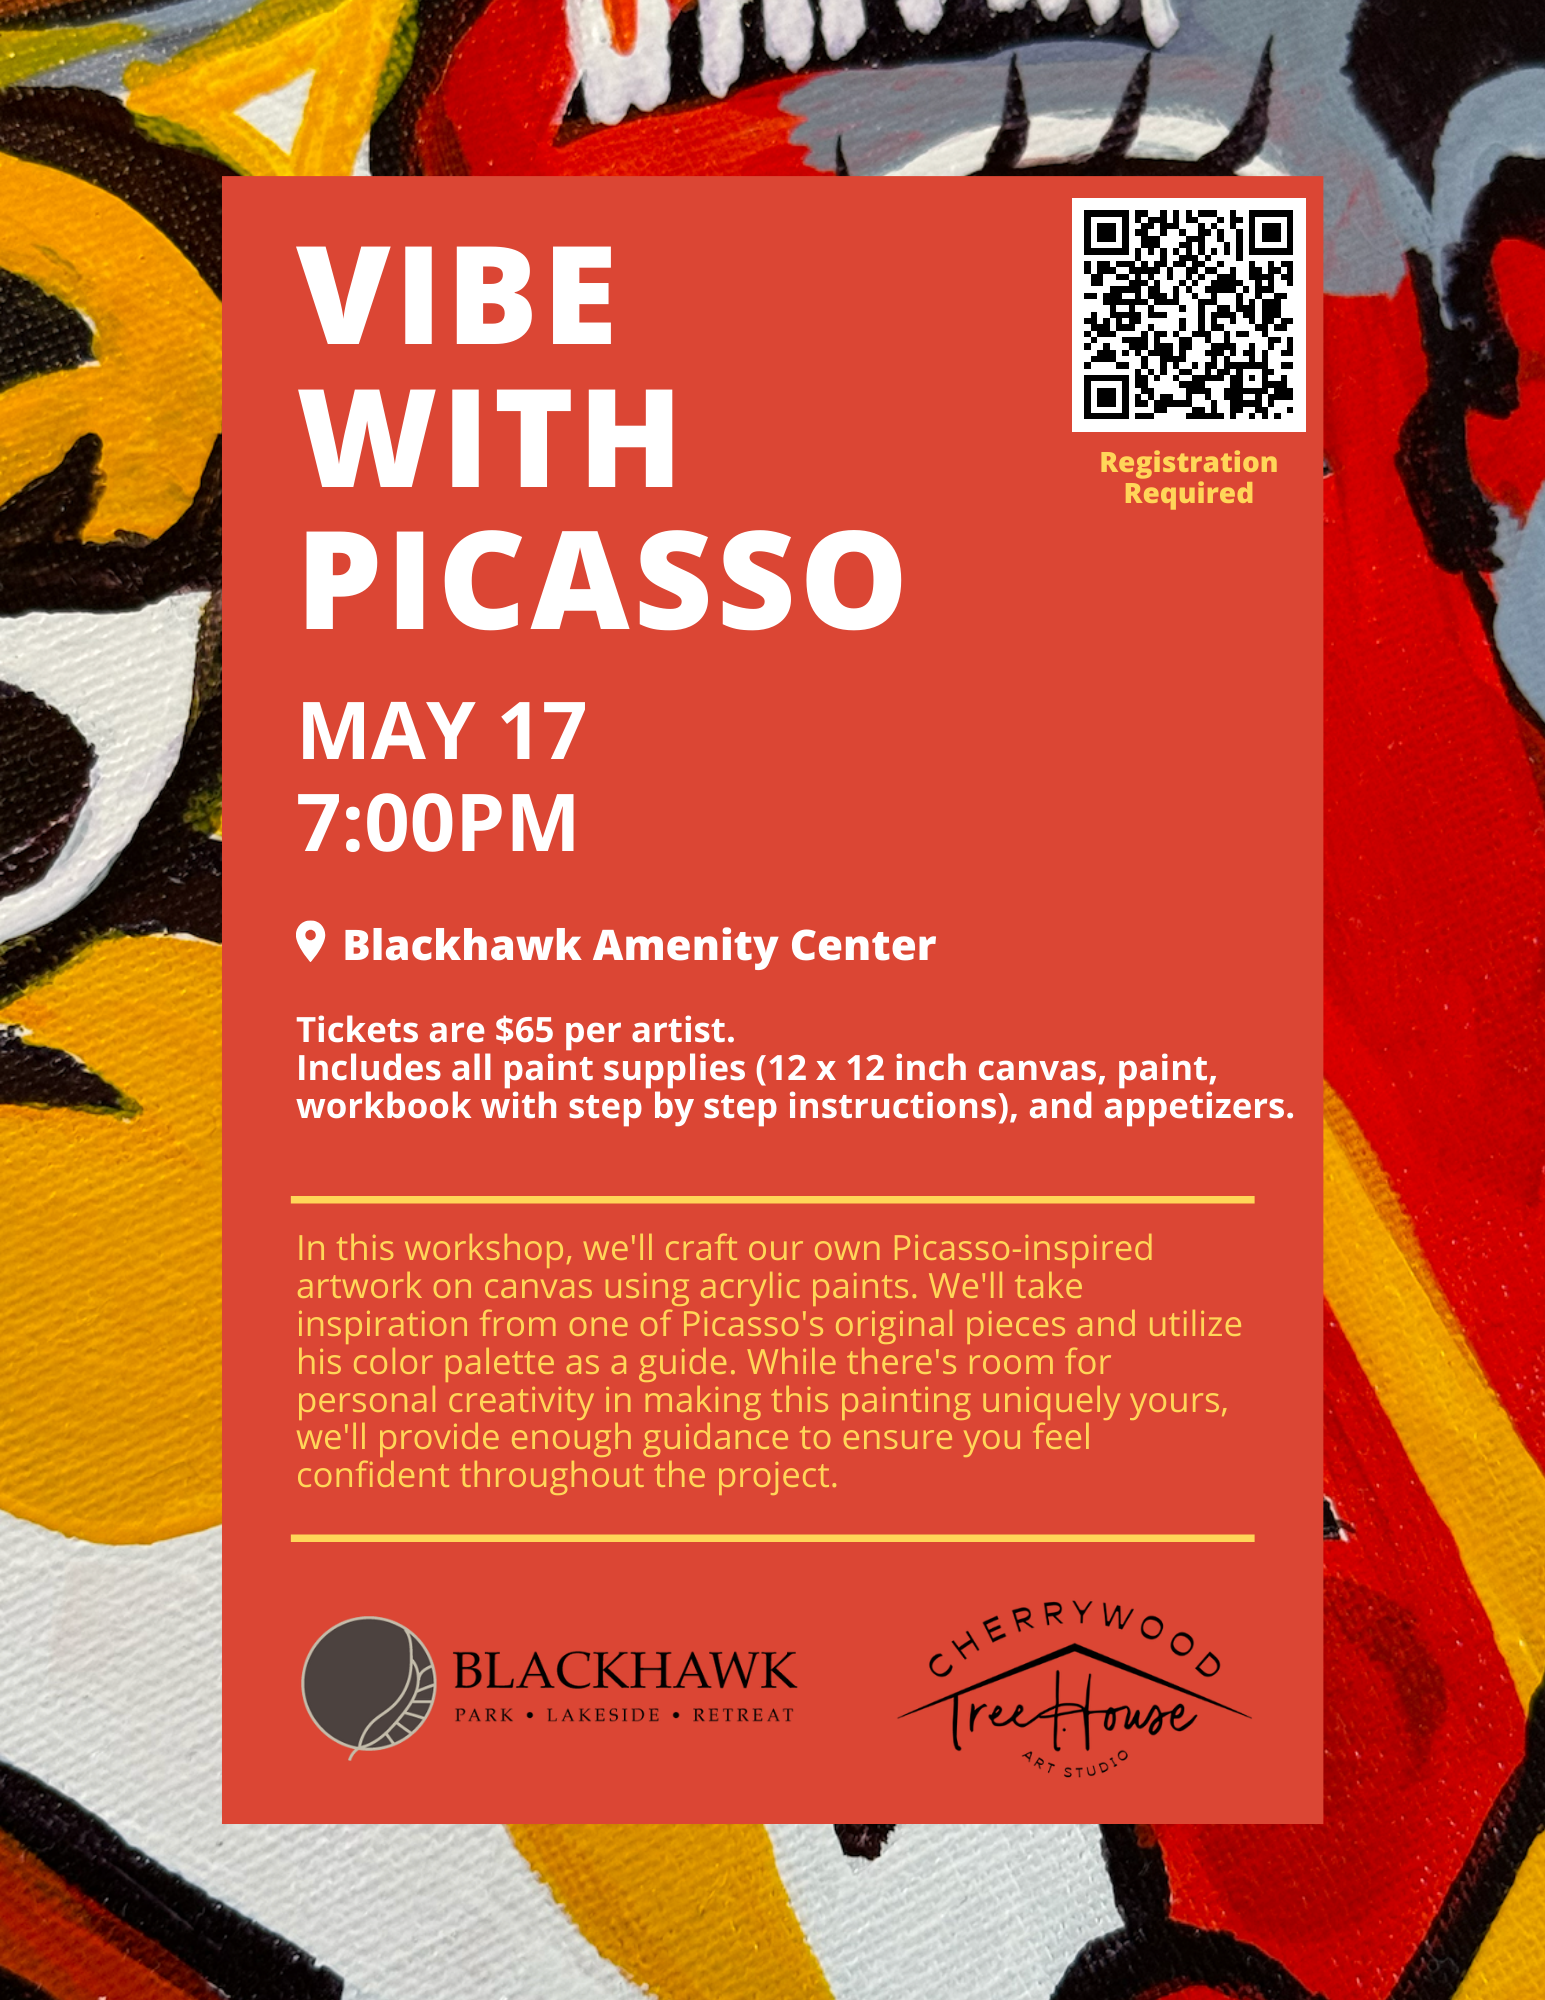 Event flyer for 'Vibe with Picasso' on May 17 at 7:00 pm at Blackhawk Amenity Center. The left side of the flyer features a close-up of a colorful, abstract painting reminiscent of Picasso's style, while the right side has a red background with event details. It states tickets are $65 per artist, including all paint supplies, a 12 x 12-inch canvas, paint, step-by-step instructions, and appetizers. A QR code at the top right corner indicates registration is required. The flyer mentions that the workshop involves creating Picasso-inspired artwork with guidance, promoting personal creativity.